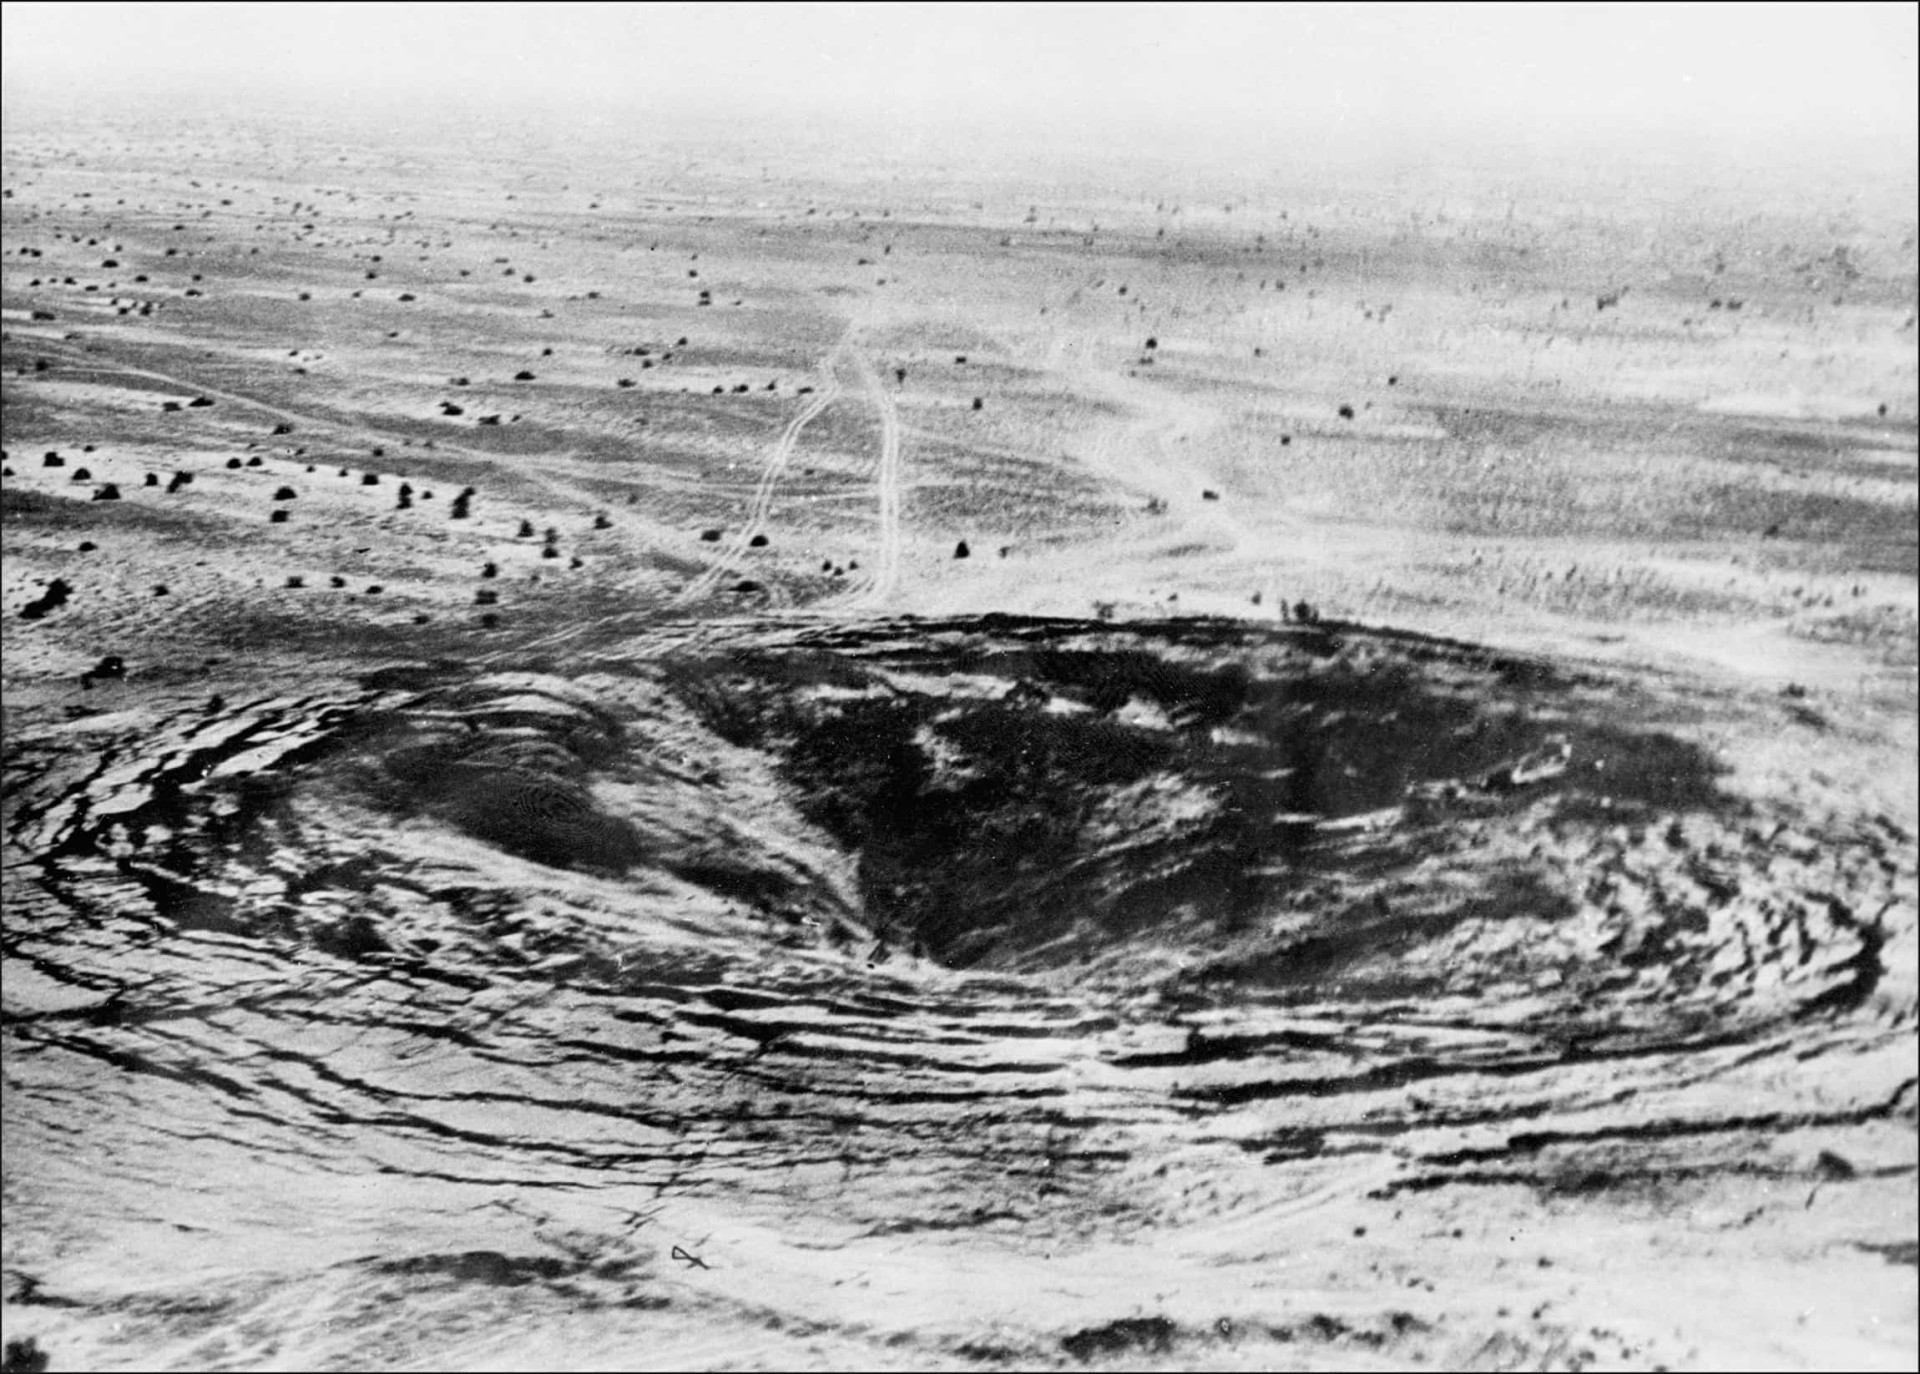 <p>India's testing of a nuclear device and the stalling of the vital SALT II talks edges the clock forward. Pictured: a crater marks the site of the first Indian underground nuclear test conducted on May 18, 1974 at Pokhran in the desert state of Rajasthan.</p><p>You may also like:<a href="https://www.starsinsider.com/n/368021?utm_source=msn.com&utm_medium=display&utm_campaign=referral_description&utm_content=490923v3en-ca"> Underexplored places you should definitely visit</a></p>